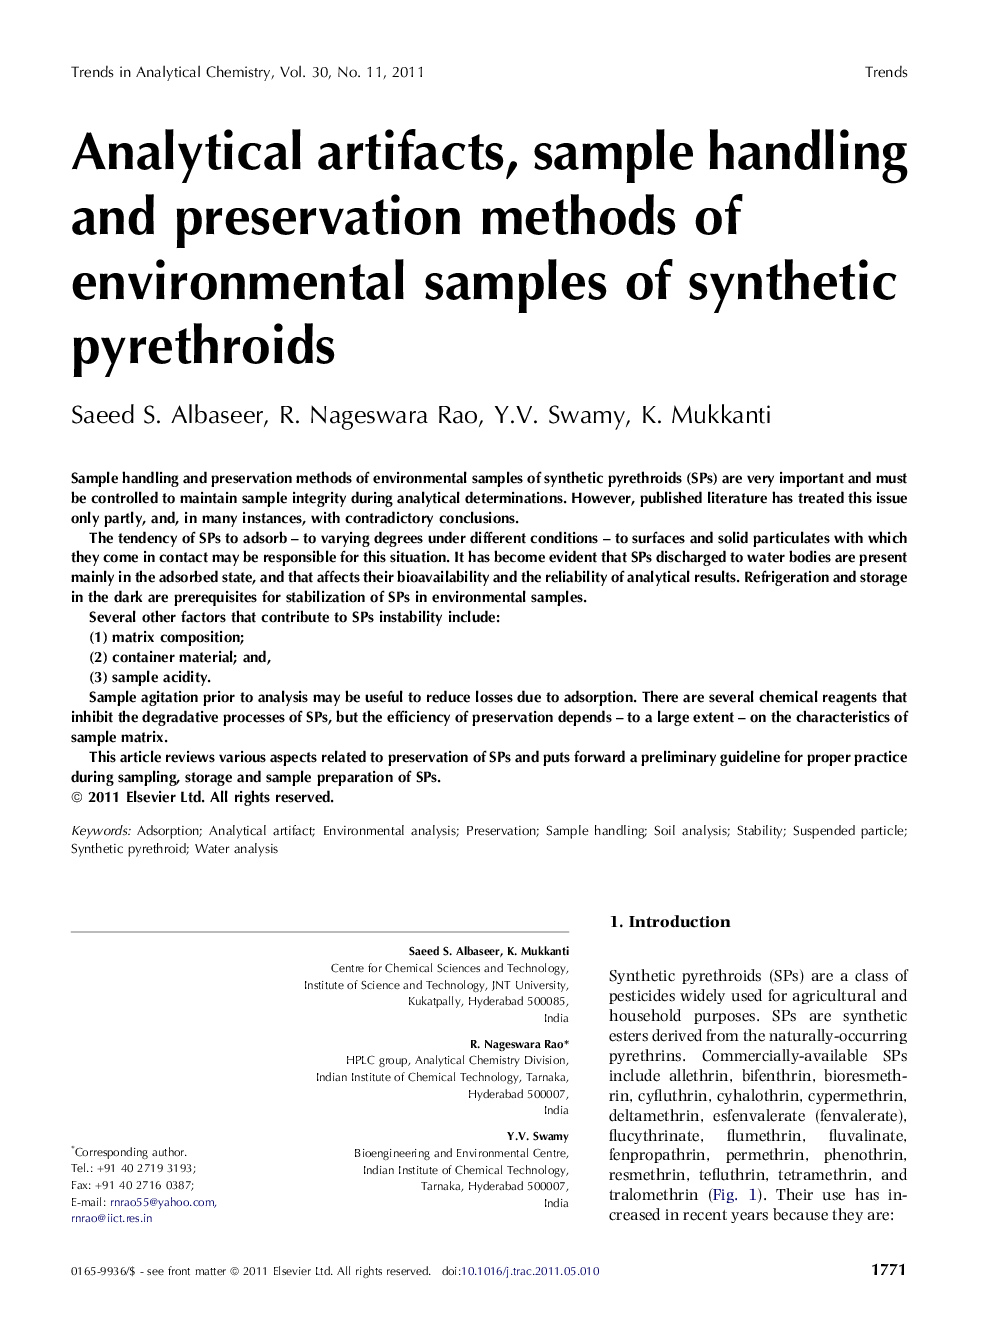 Analytical artifacts, sample handling and preservation methods of environmental samples of synthetic pyrethroids